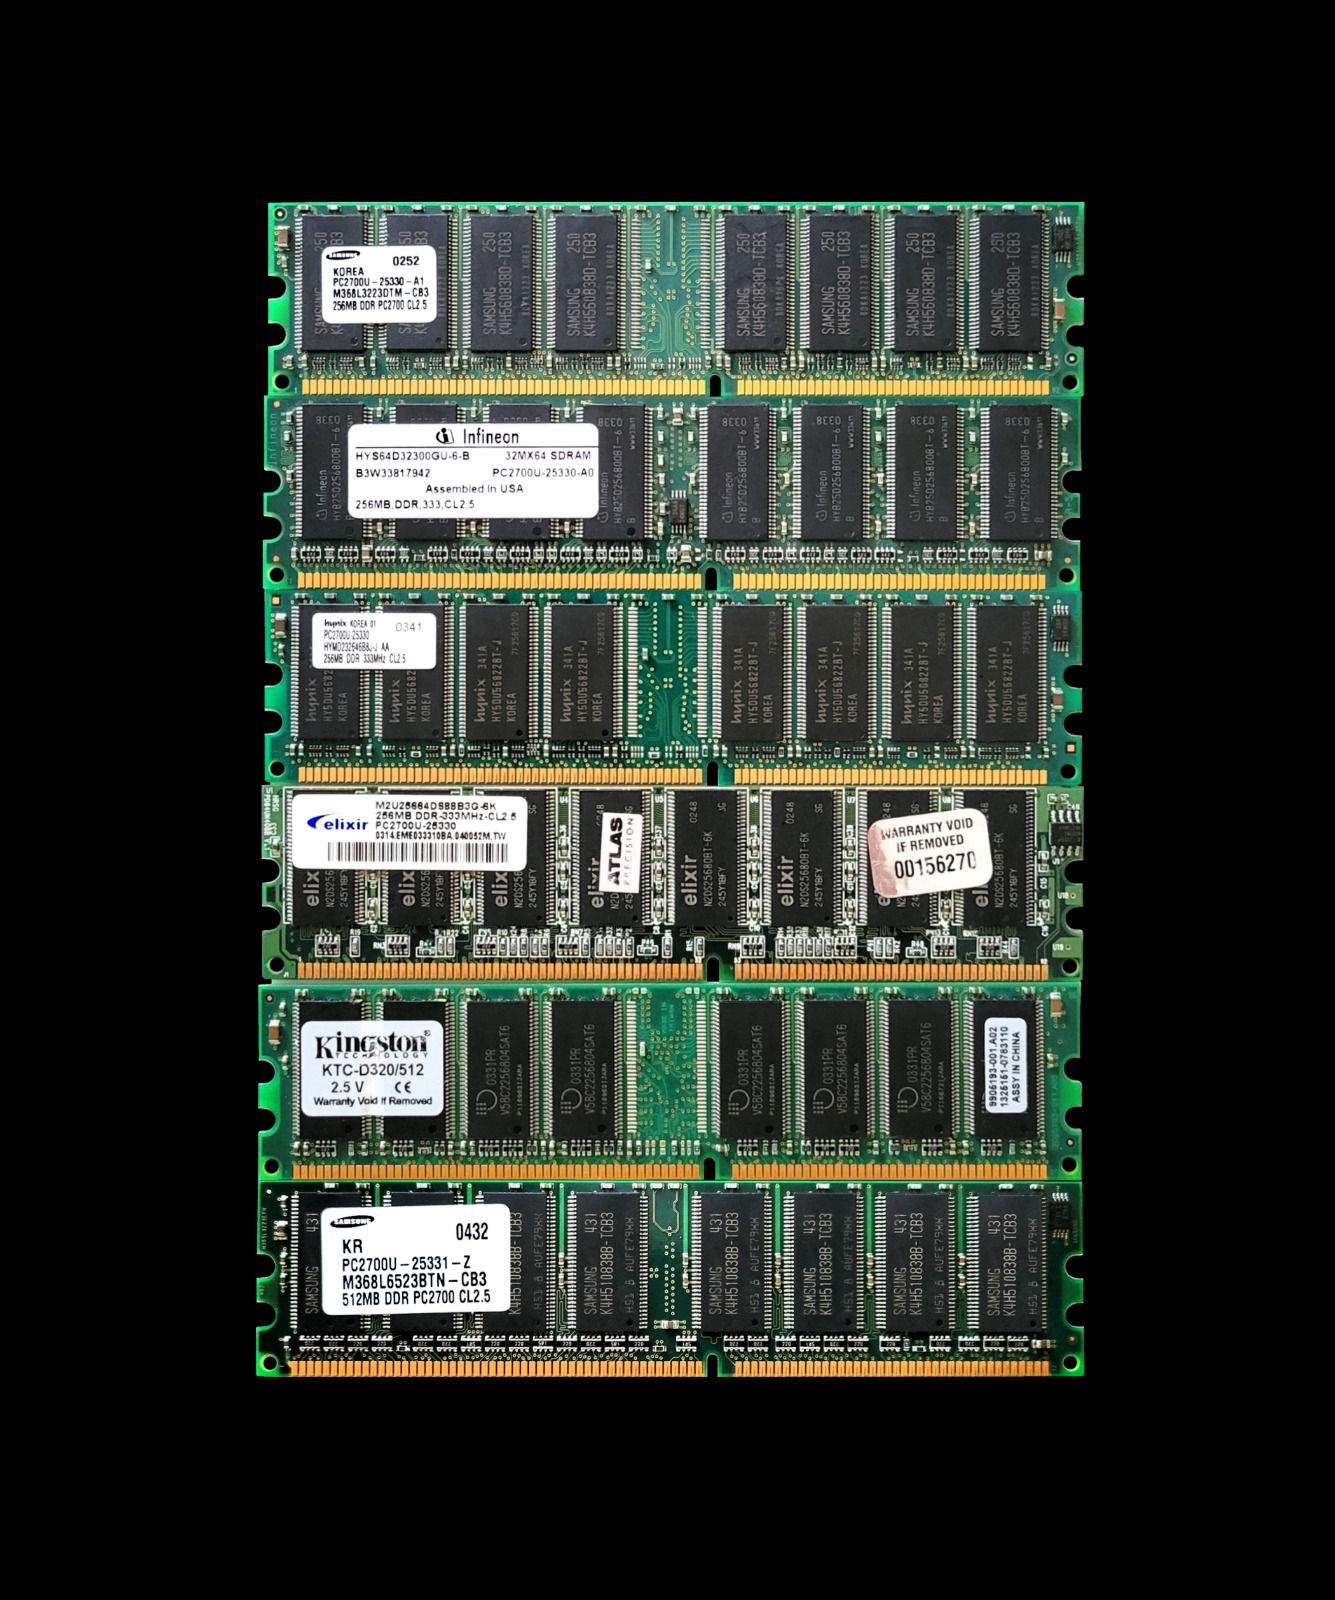 LOT of 6 (4-256MB) (2-512MB) PC2700 DDR-333MHz CL2.5 DIMM Mixed Memory Modules